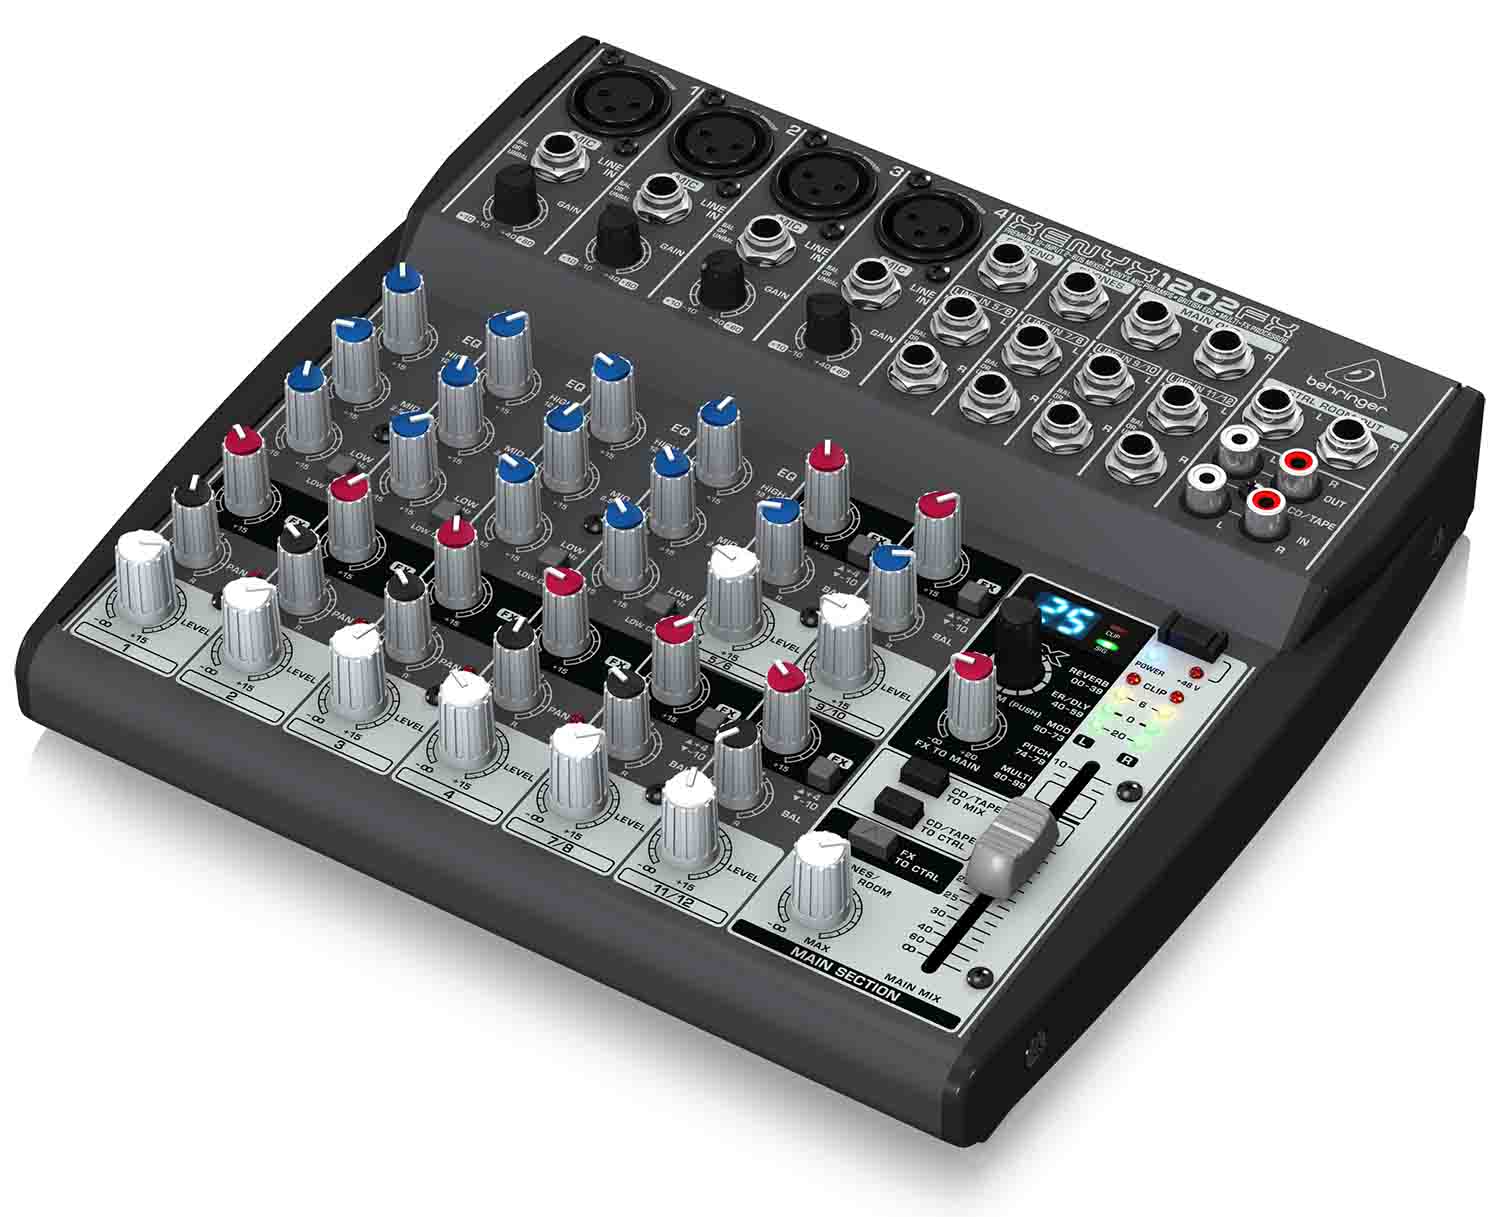 B-Stock: Behringer Xenyx 1202 FX, Premium 12-Input 2-Bus Mixer with XENYX Mic Preamps - Hollywood DJ